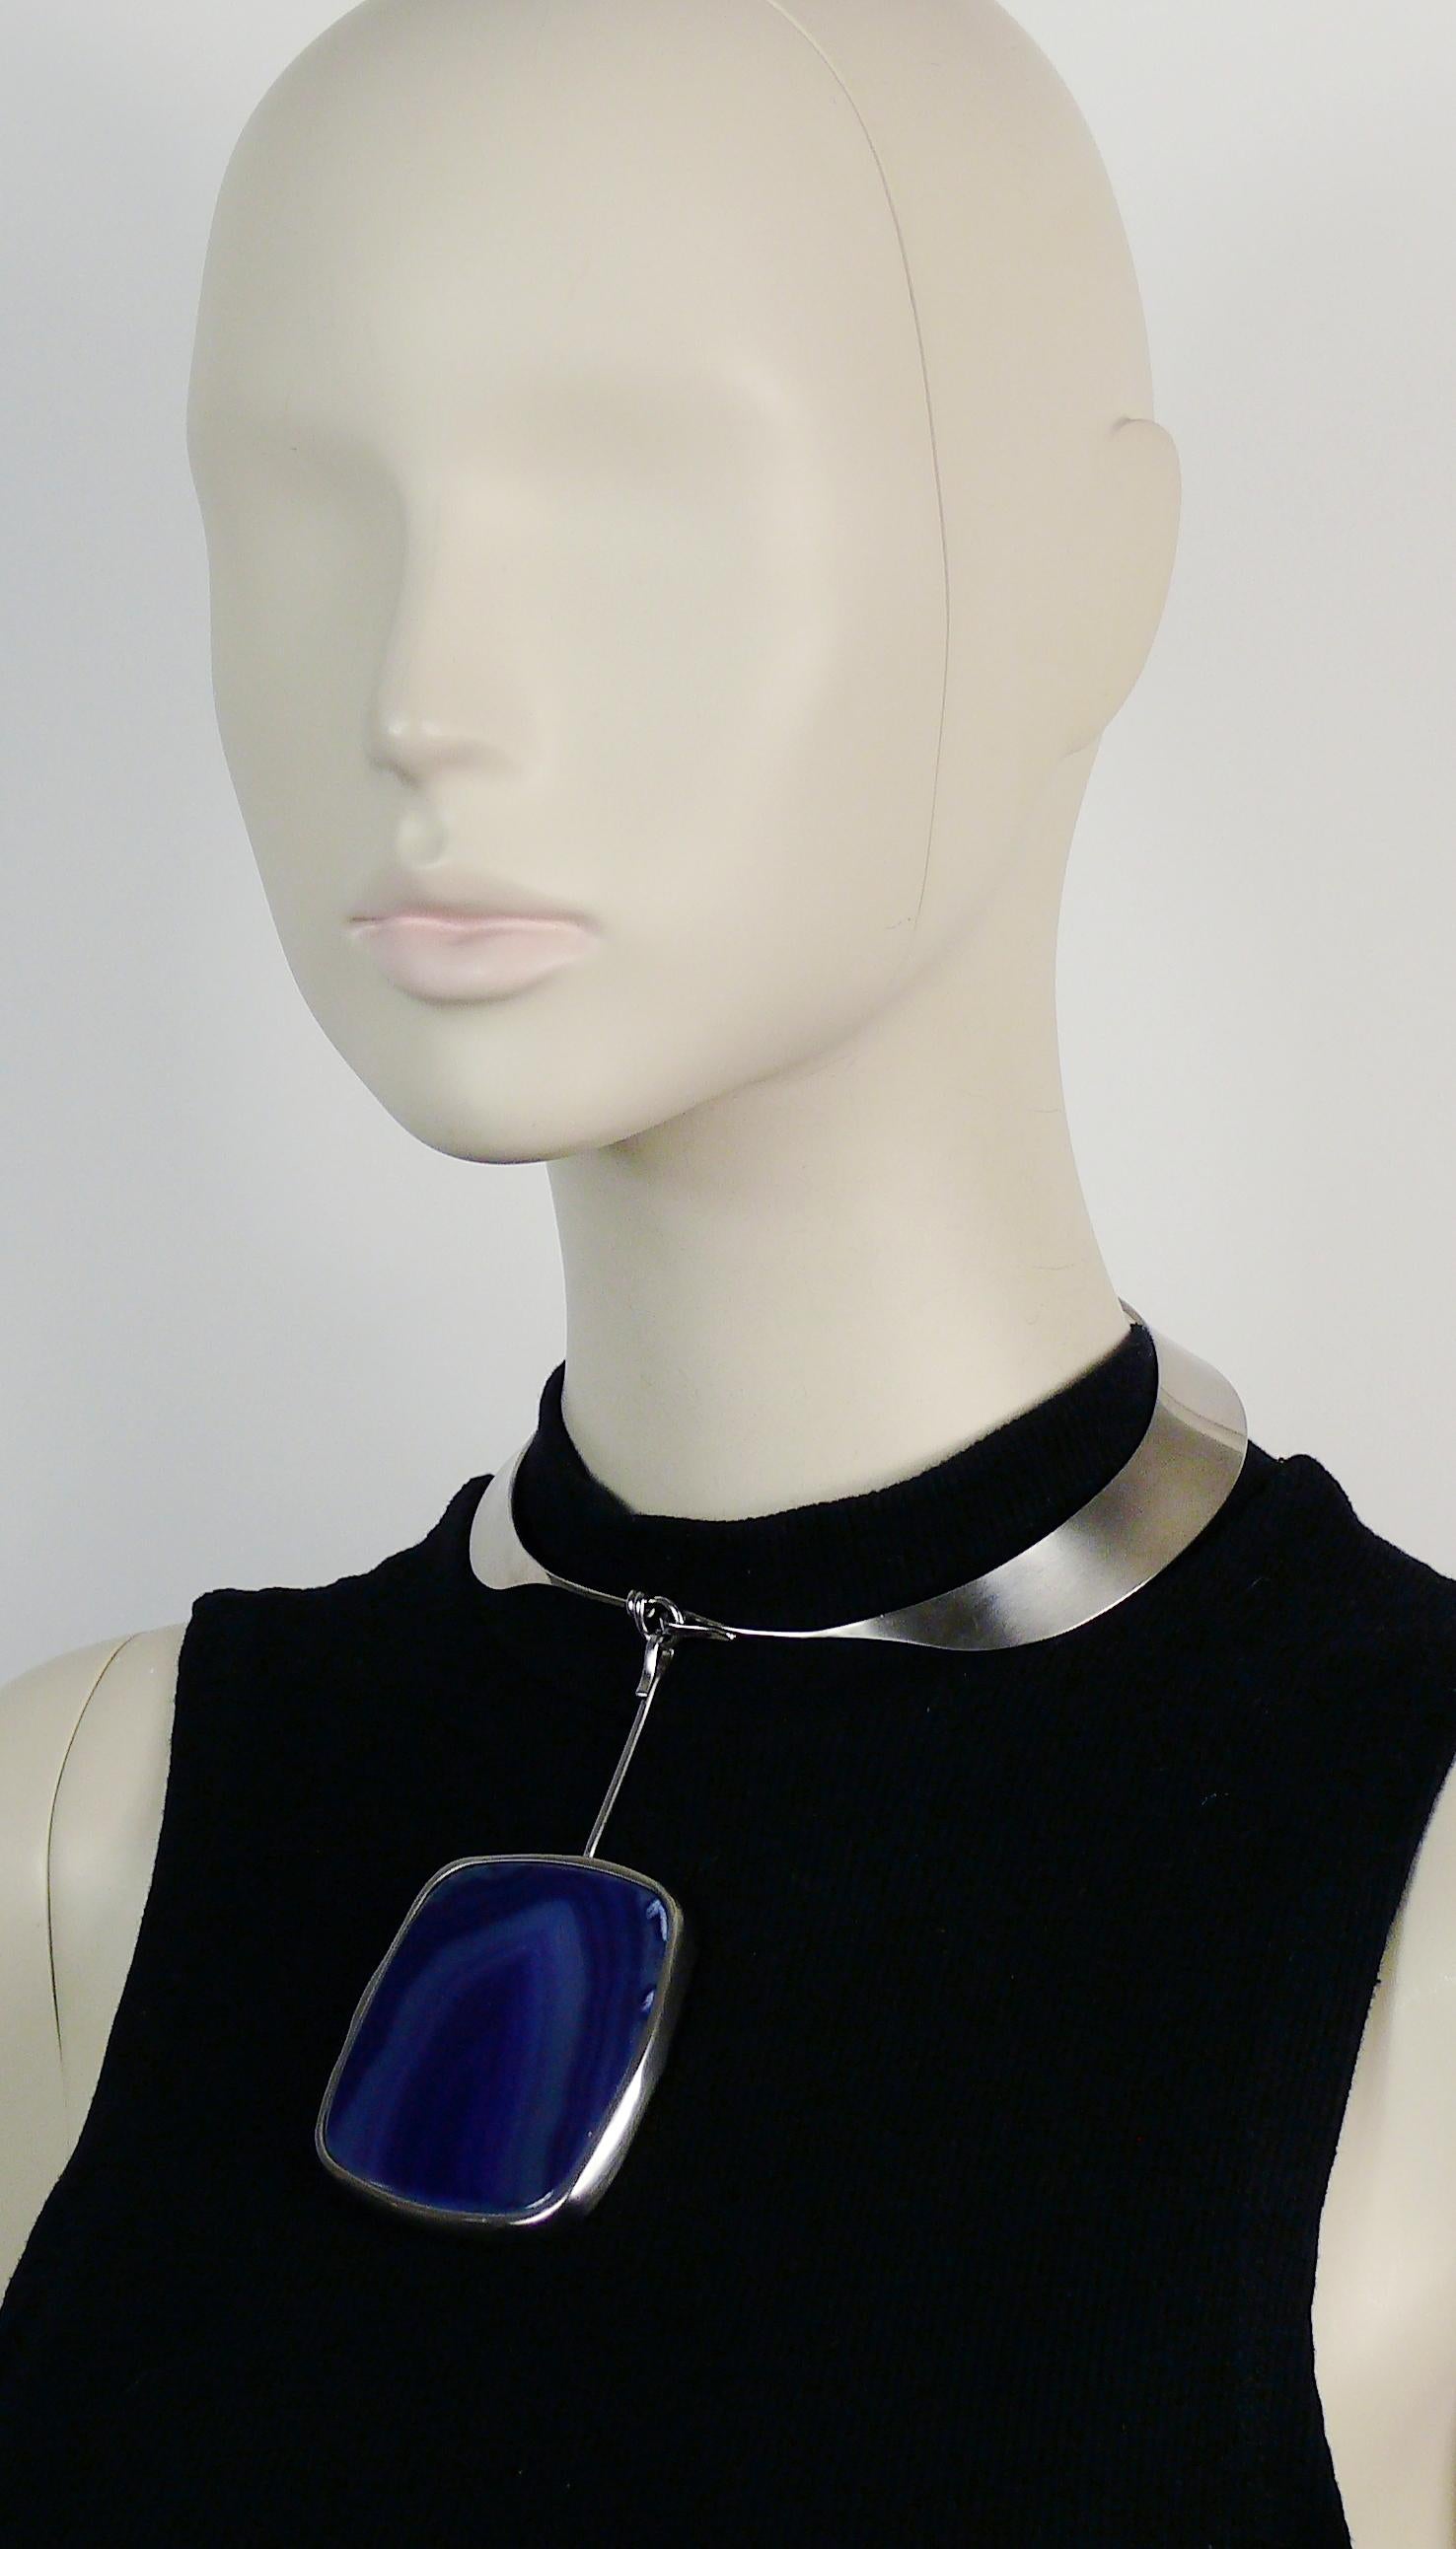 Women's Chanel Modernist Choker Necklace with Agate Pendant For Sale